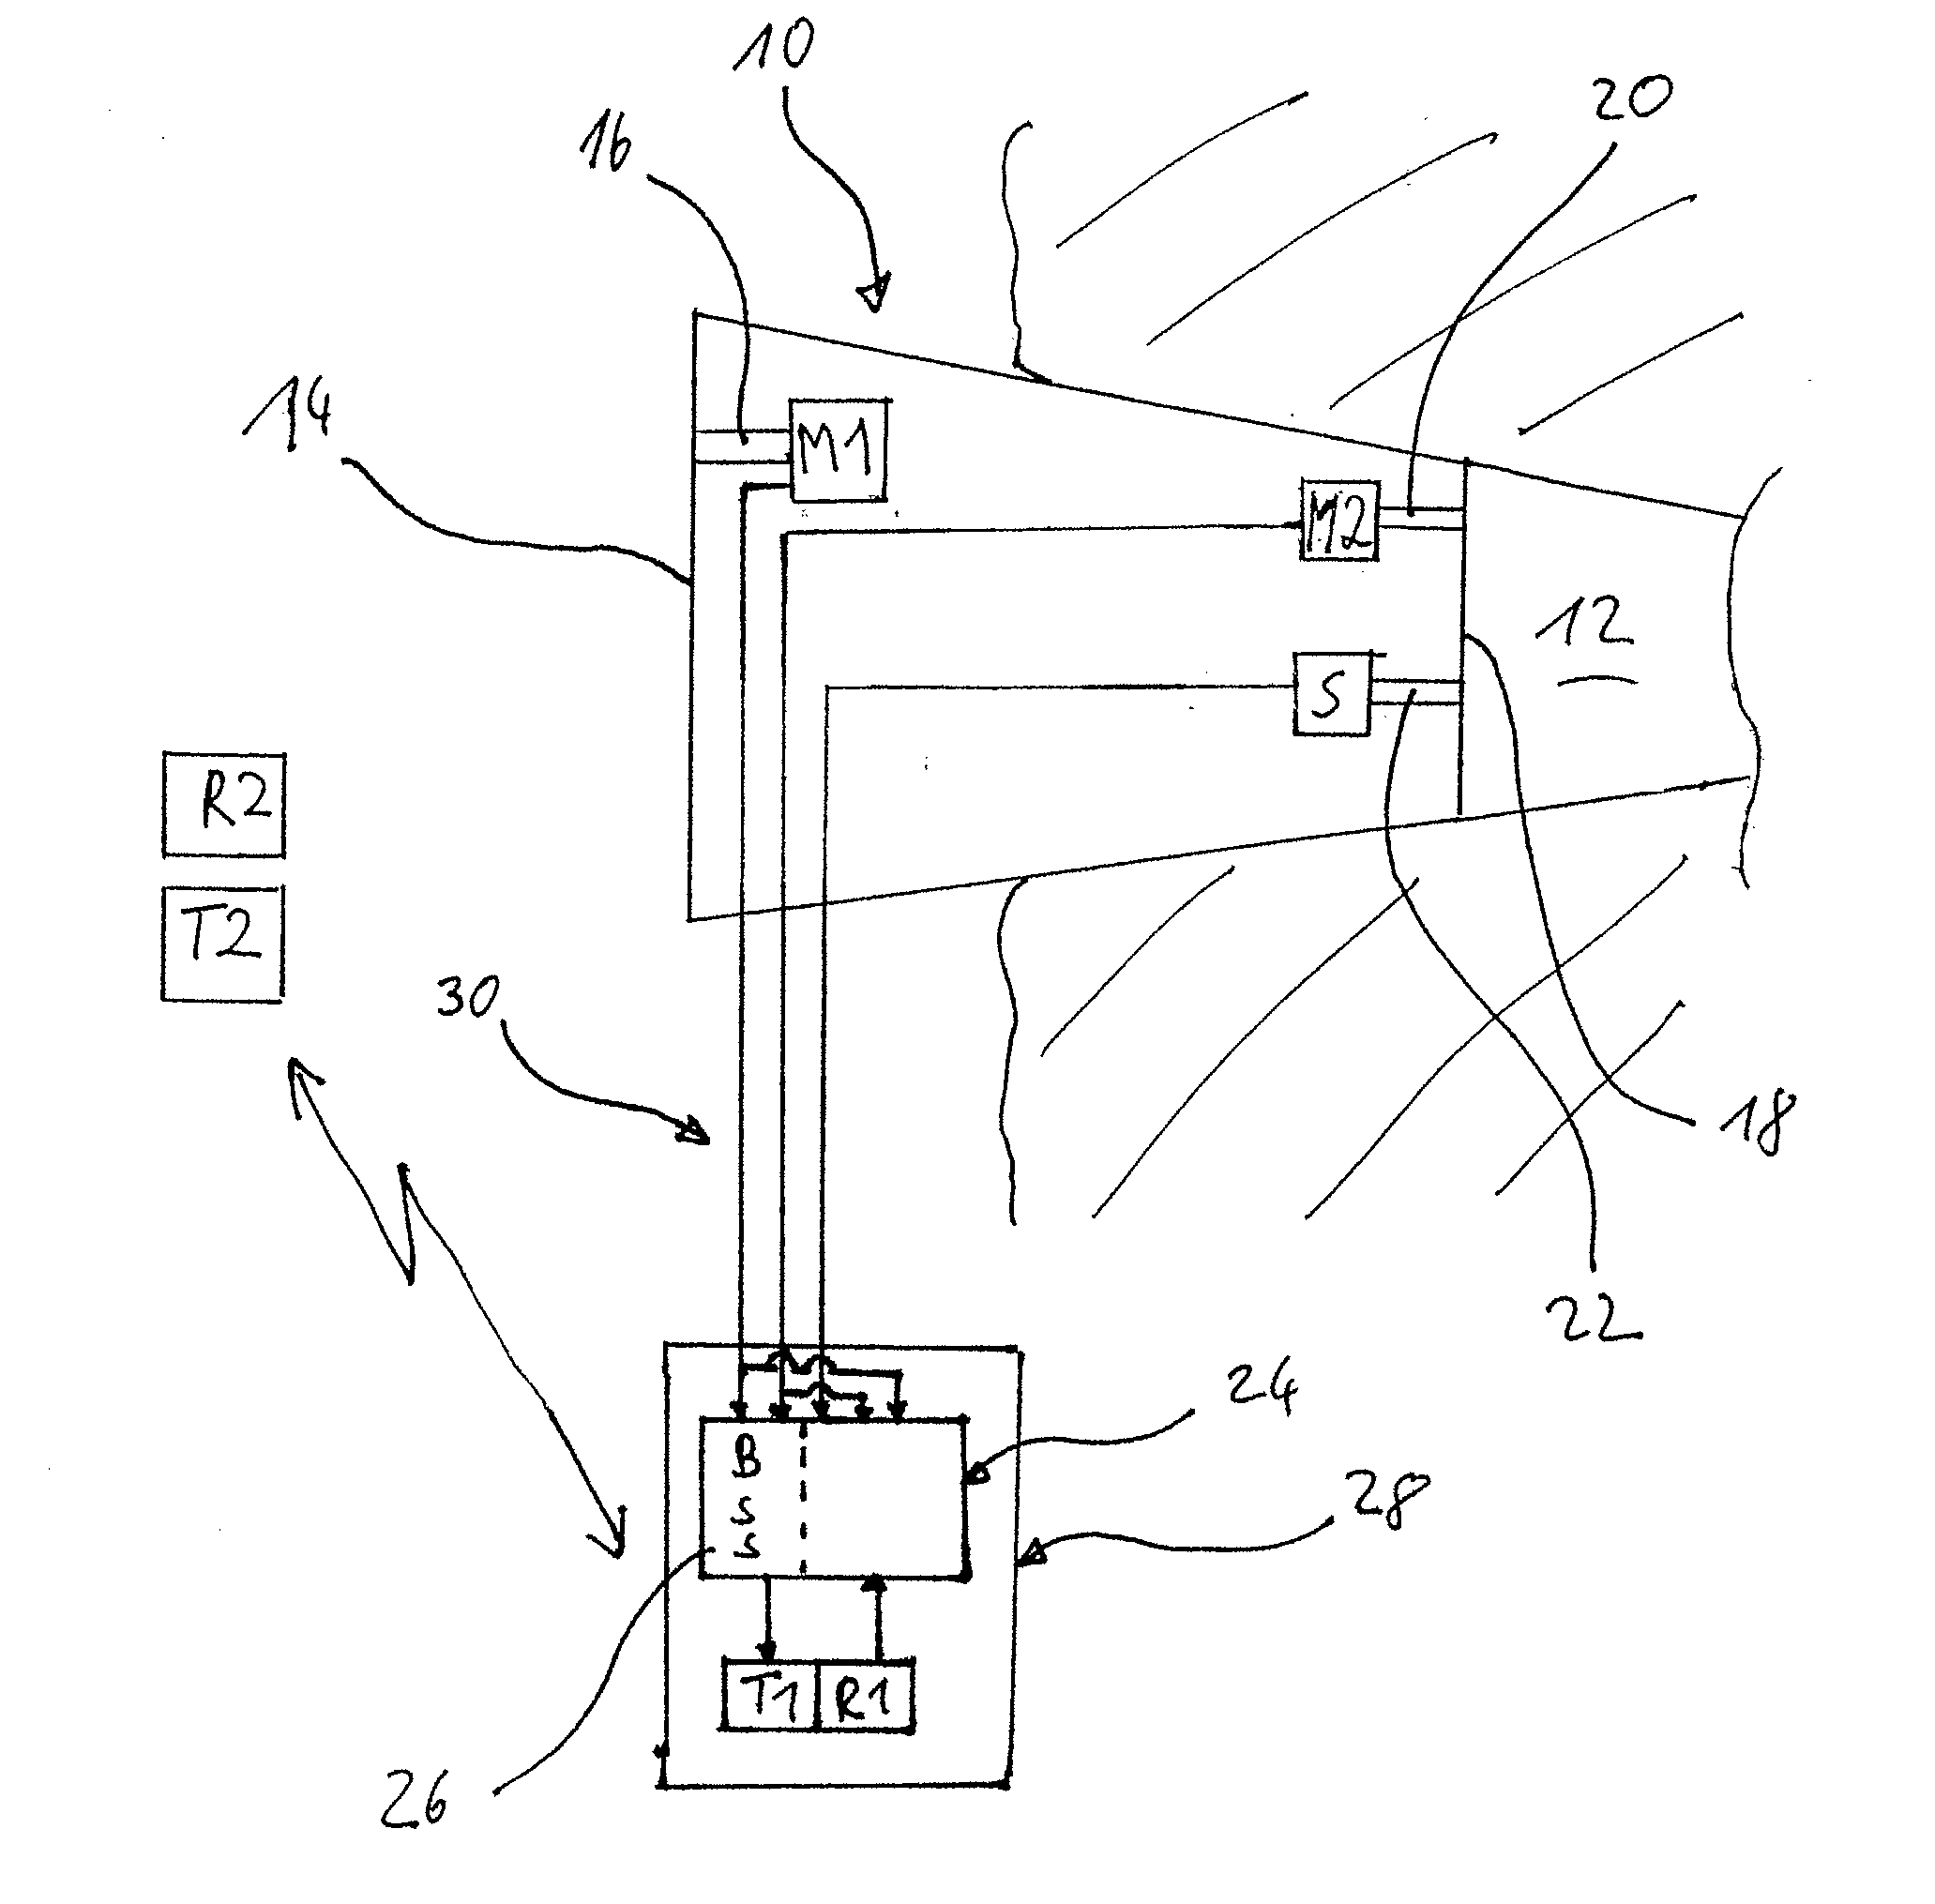 System and method for separation of a user's voice from ambient sound